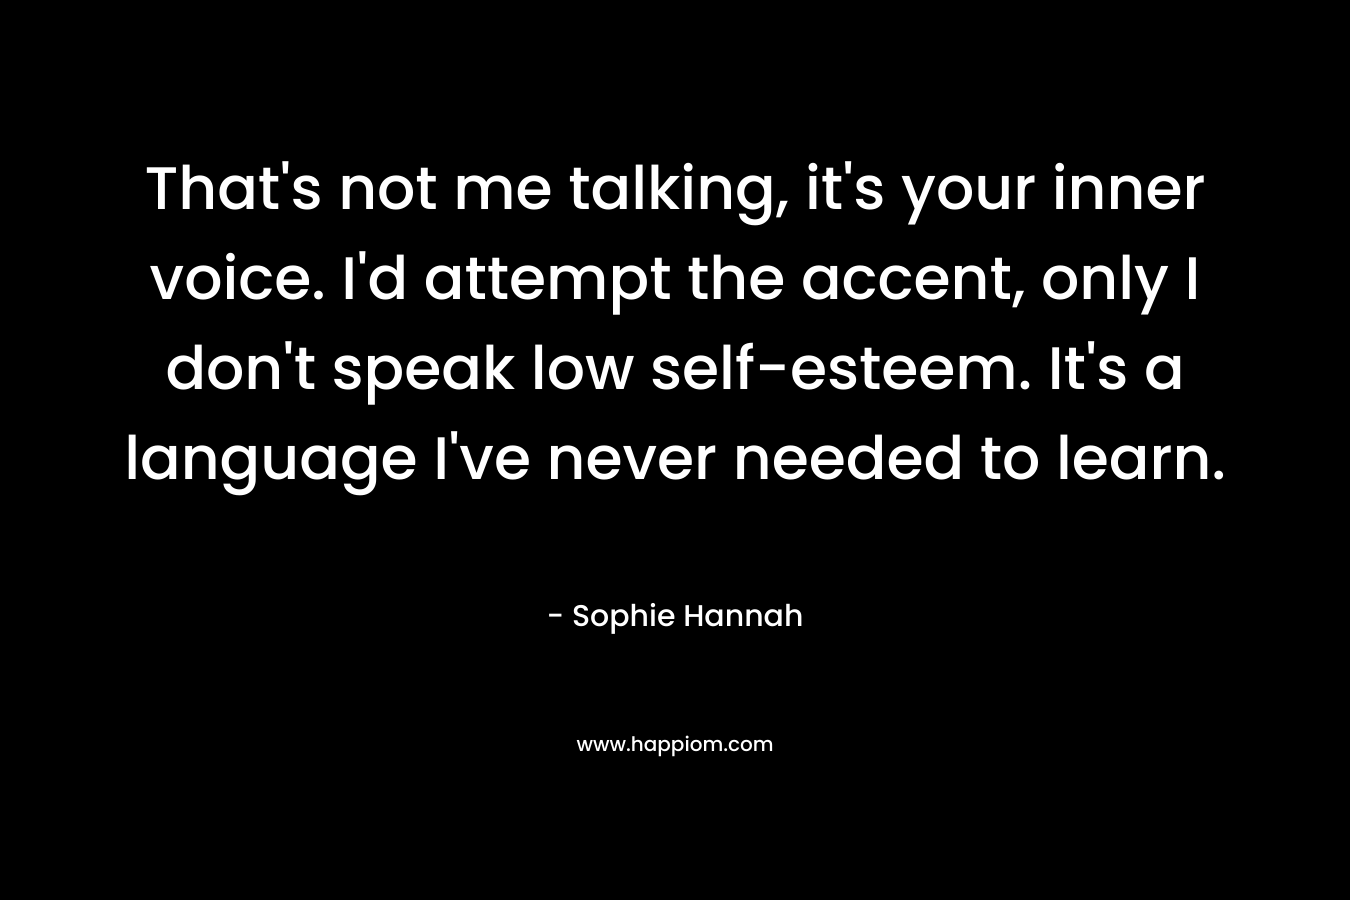 That’s not me talking, it’s your inner voice. I’d attempt the accent, only I don’t speak low self-esteem. It’s a language I’ve never needed to learn. – Sophie Hannah